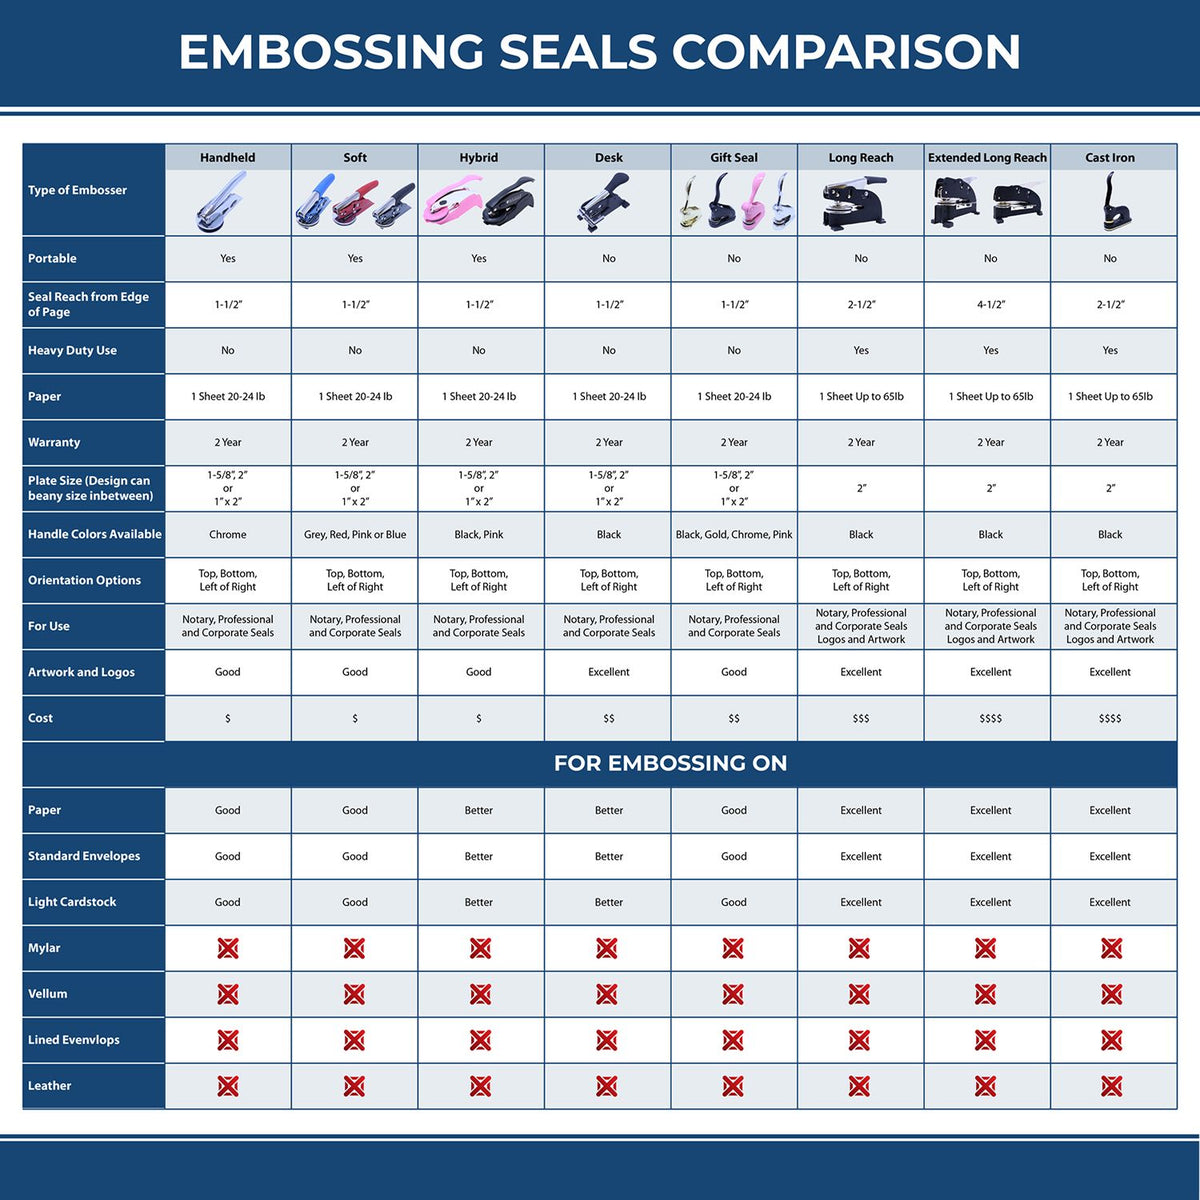 A comparison chart for the different types of mount models available for the Long Reach Iowa Land Surveyor Seal.